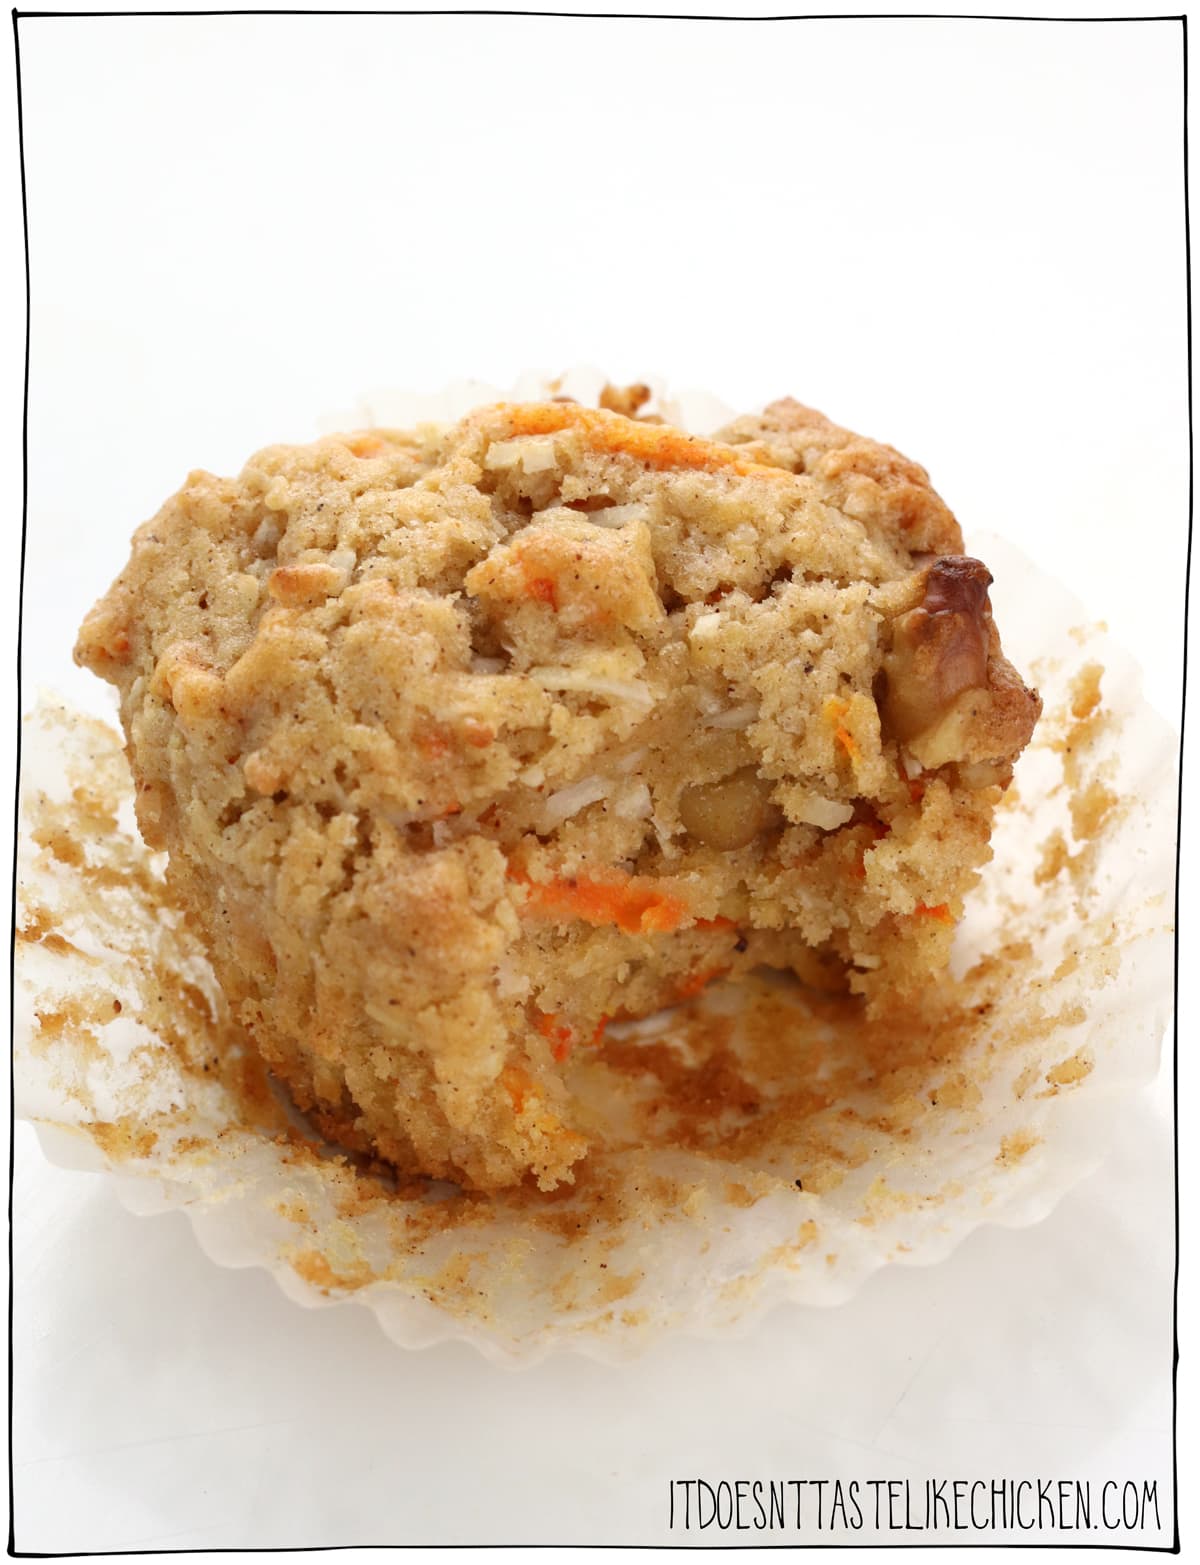 Easy Vegan Carrot Muffins! The tastiest muffins ever. Each muffin is bursting with sweet carrots, crunchy walnuts, chewy coconut, cinnamon, and nutmeg. Making these the BEST carrot muffins you will ever taste! #itdoesnttastelikechicken #veganrecipes #veganbaking #muffins